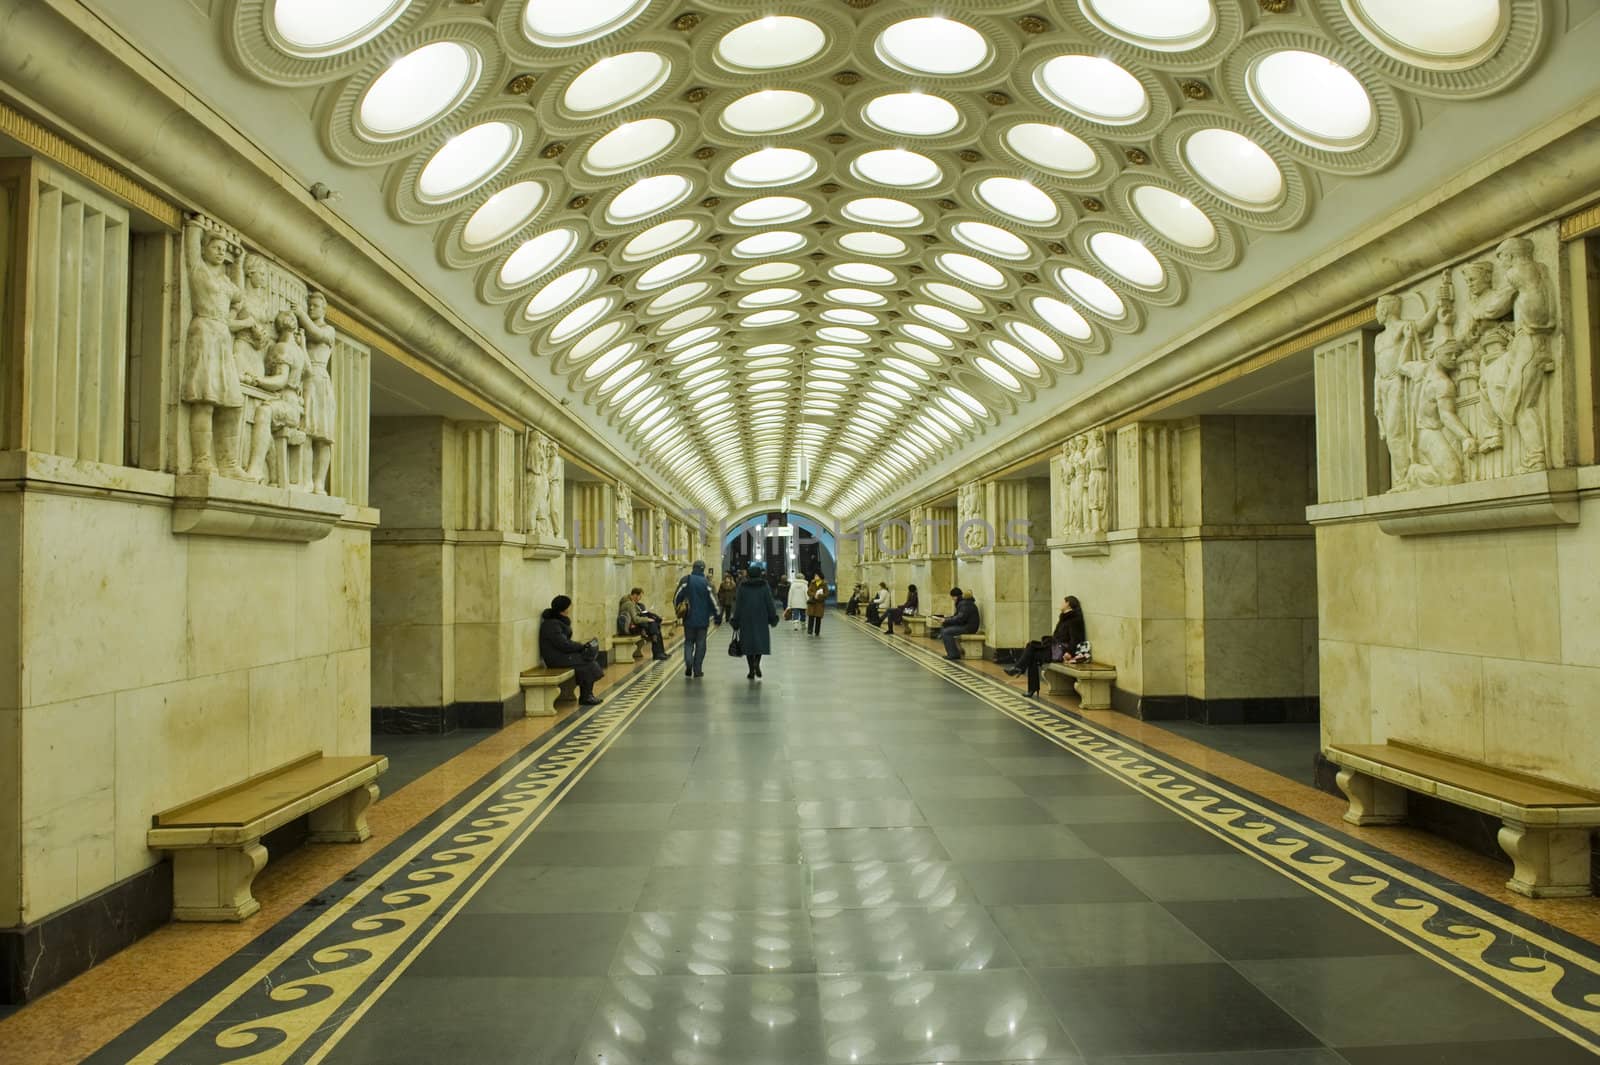 Moscow metro by Alenmax